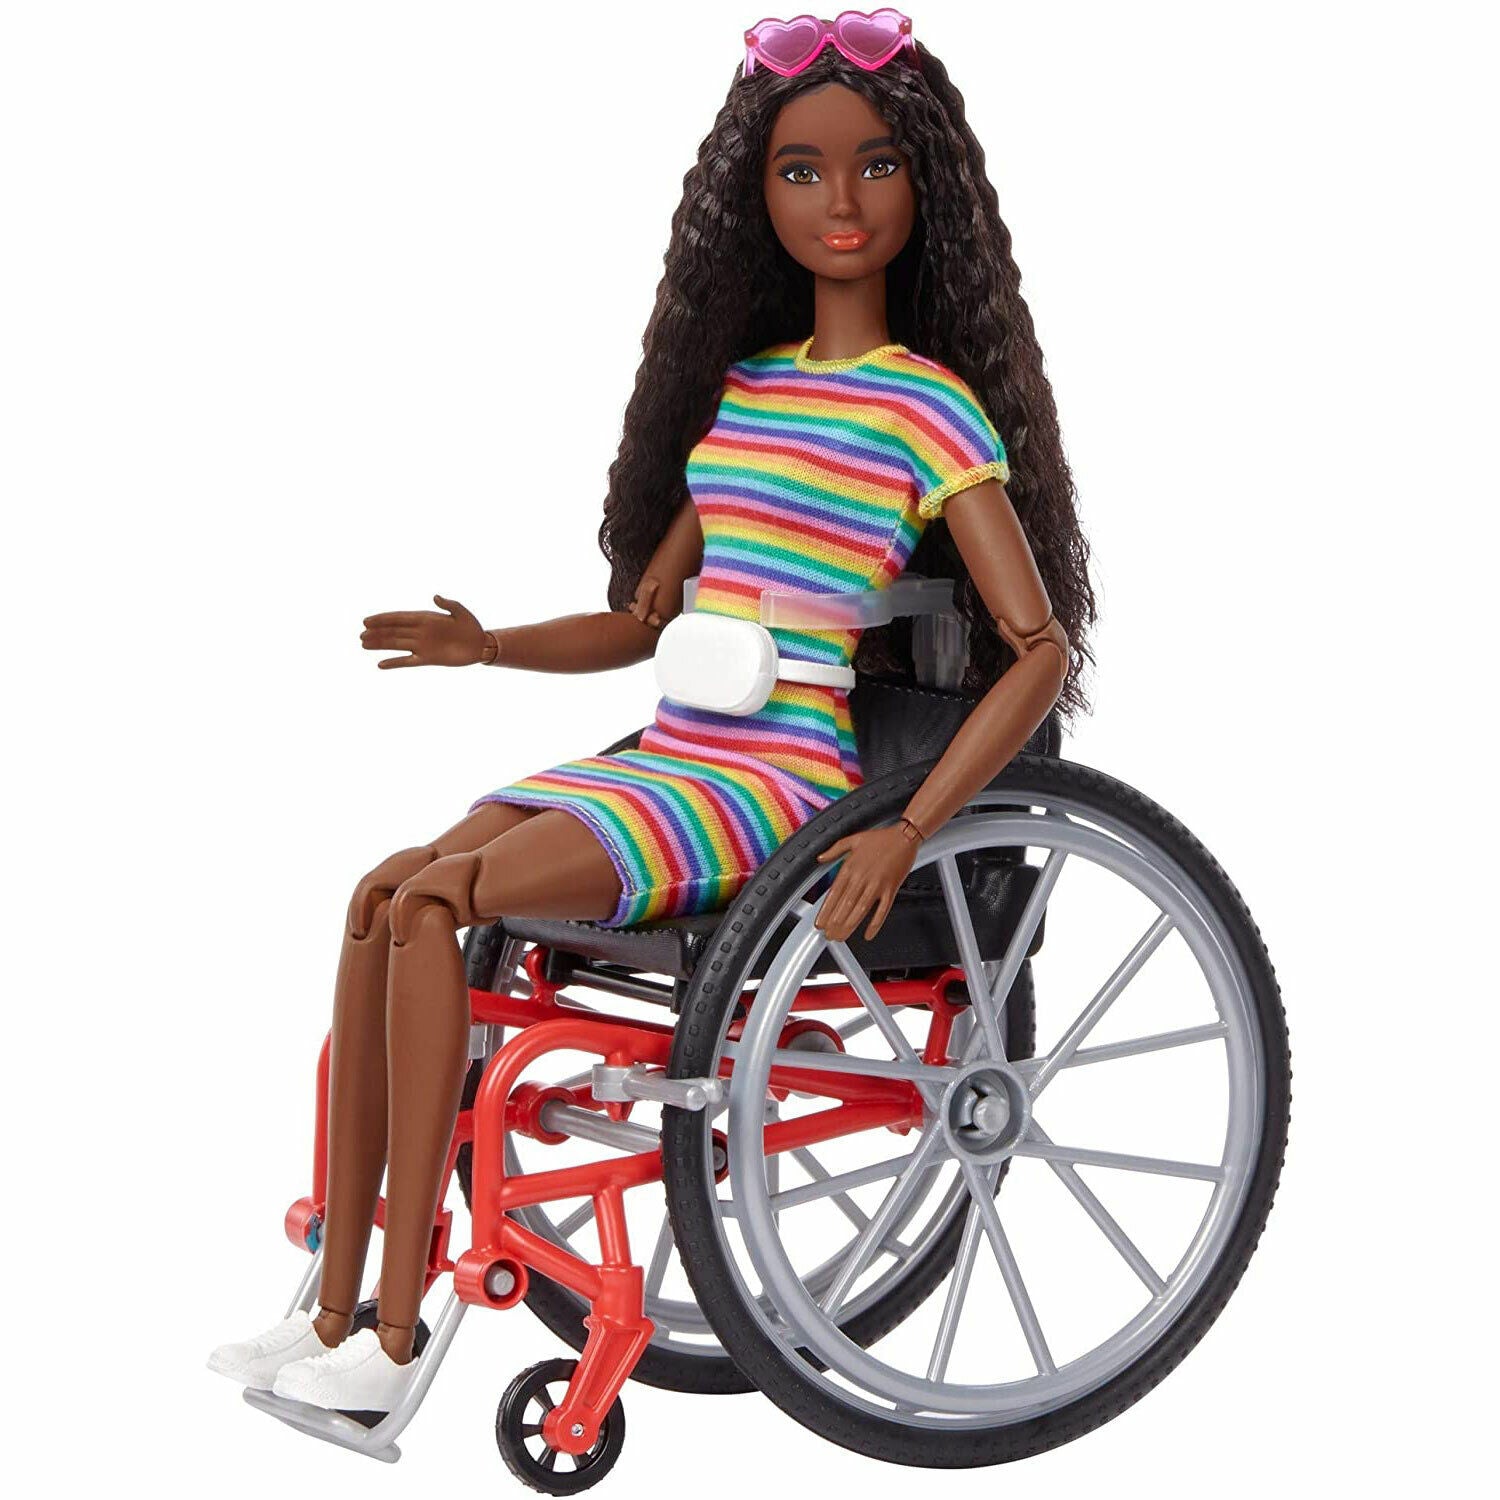 New Barbie Fashionistas Doll #166 with Wheelchair - Crimped Brunette Hair